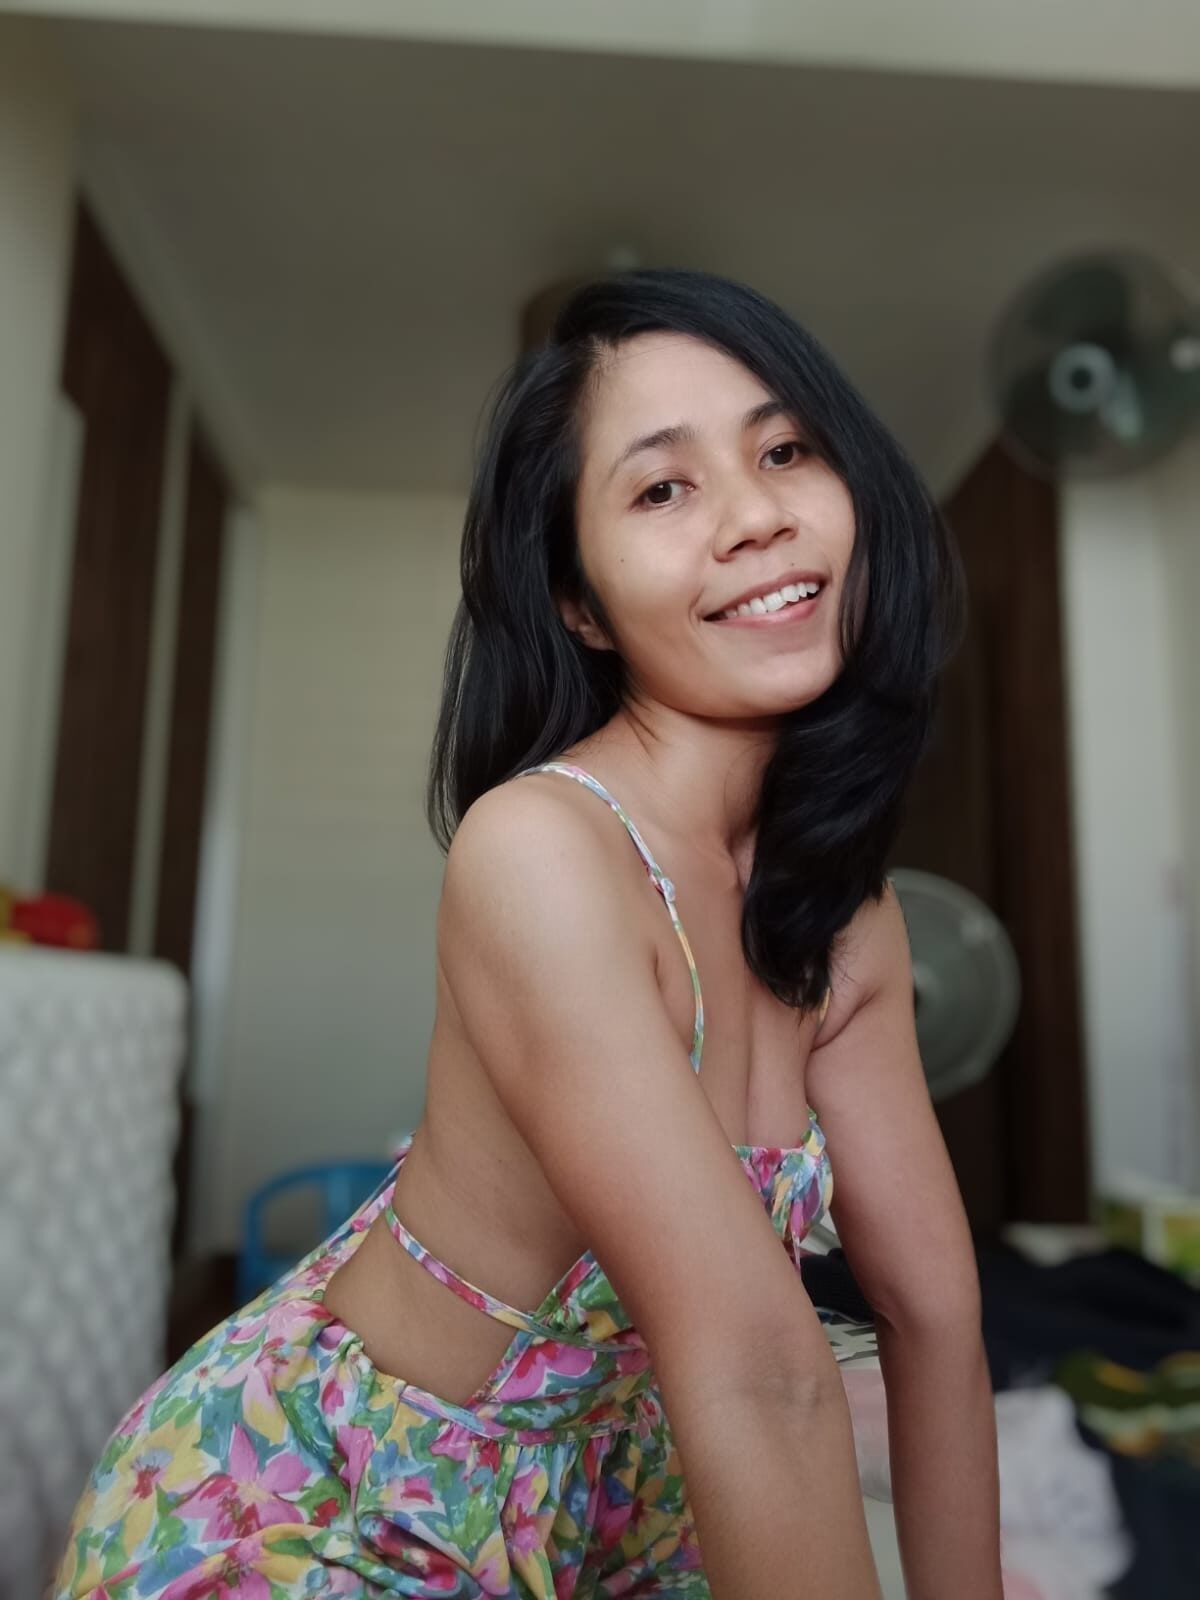 Bali Pussy from Bali Babe